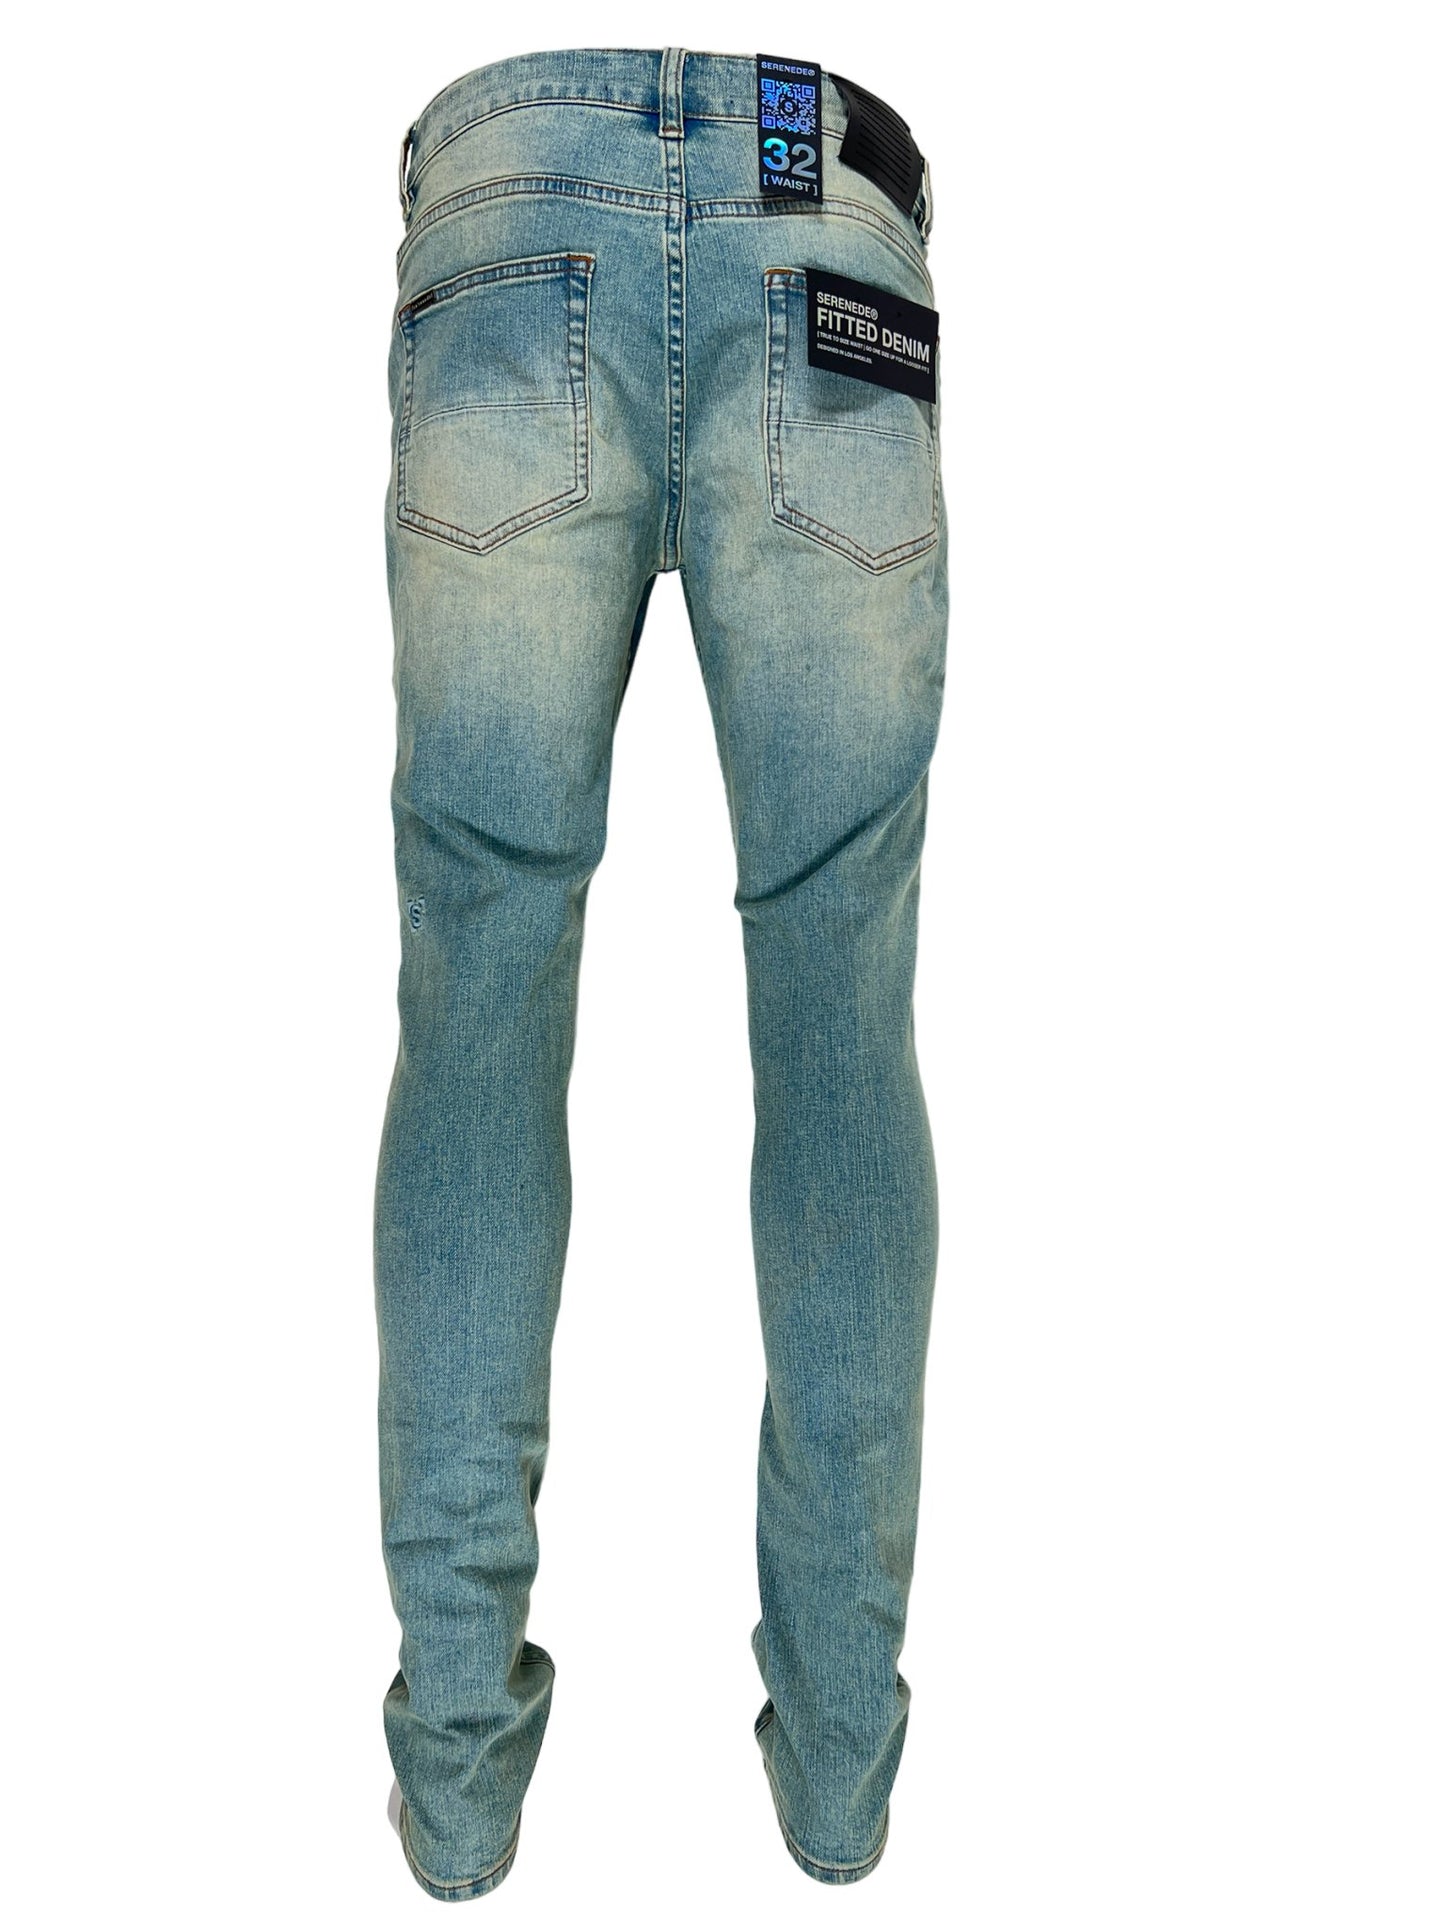 Probus SERENEDE ROME JEANS CLASSIC SERENEDE ROME JEANS CLASSIC 28